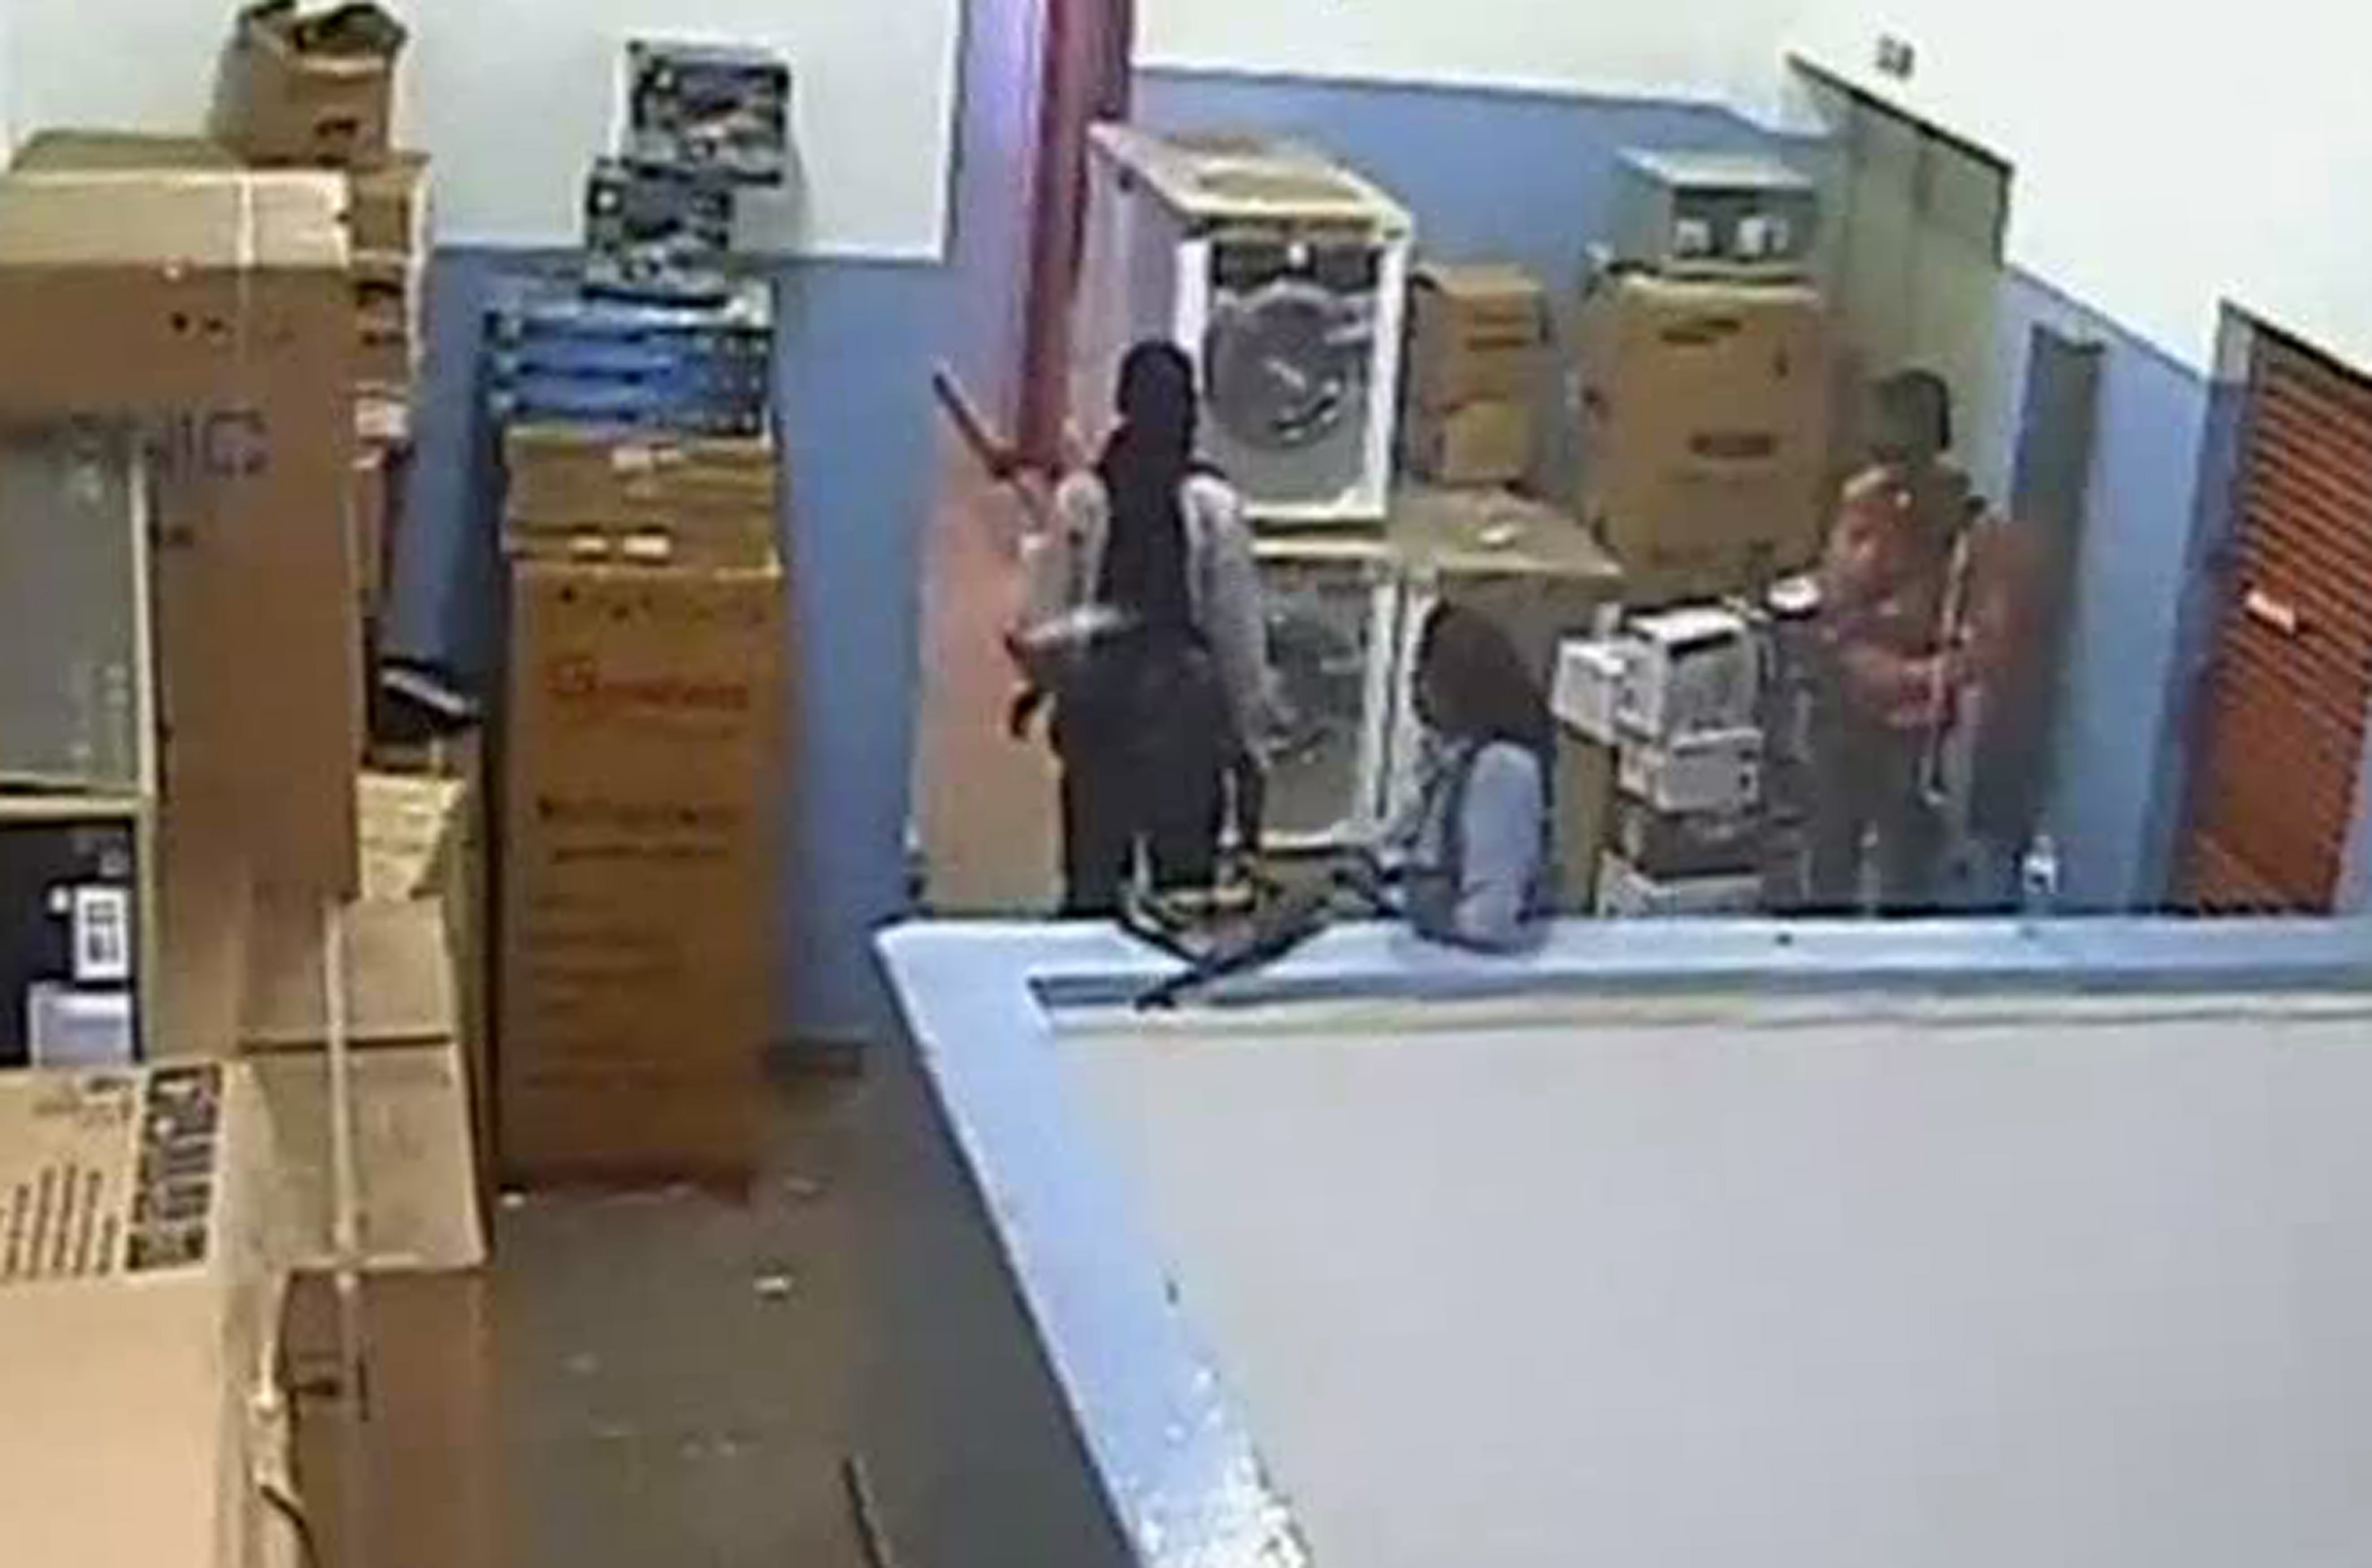 Kenyan Defence Forces via Citizen TV
In this video image made available Friday, men carrying automatic weapons and bags are seen in the storeroom of the Nakumatt shop during the four-day-long siege at the Westgate Mall in Nairobi, Kenya, that killed more than 60 people last month. A Kenyan military spokesman has confirmed the names of four attackers as Abu Baara al-Sudani, unseen, Omar Nabhan, center, Khattab al-Kene, left, and Umayr, right.